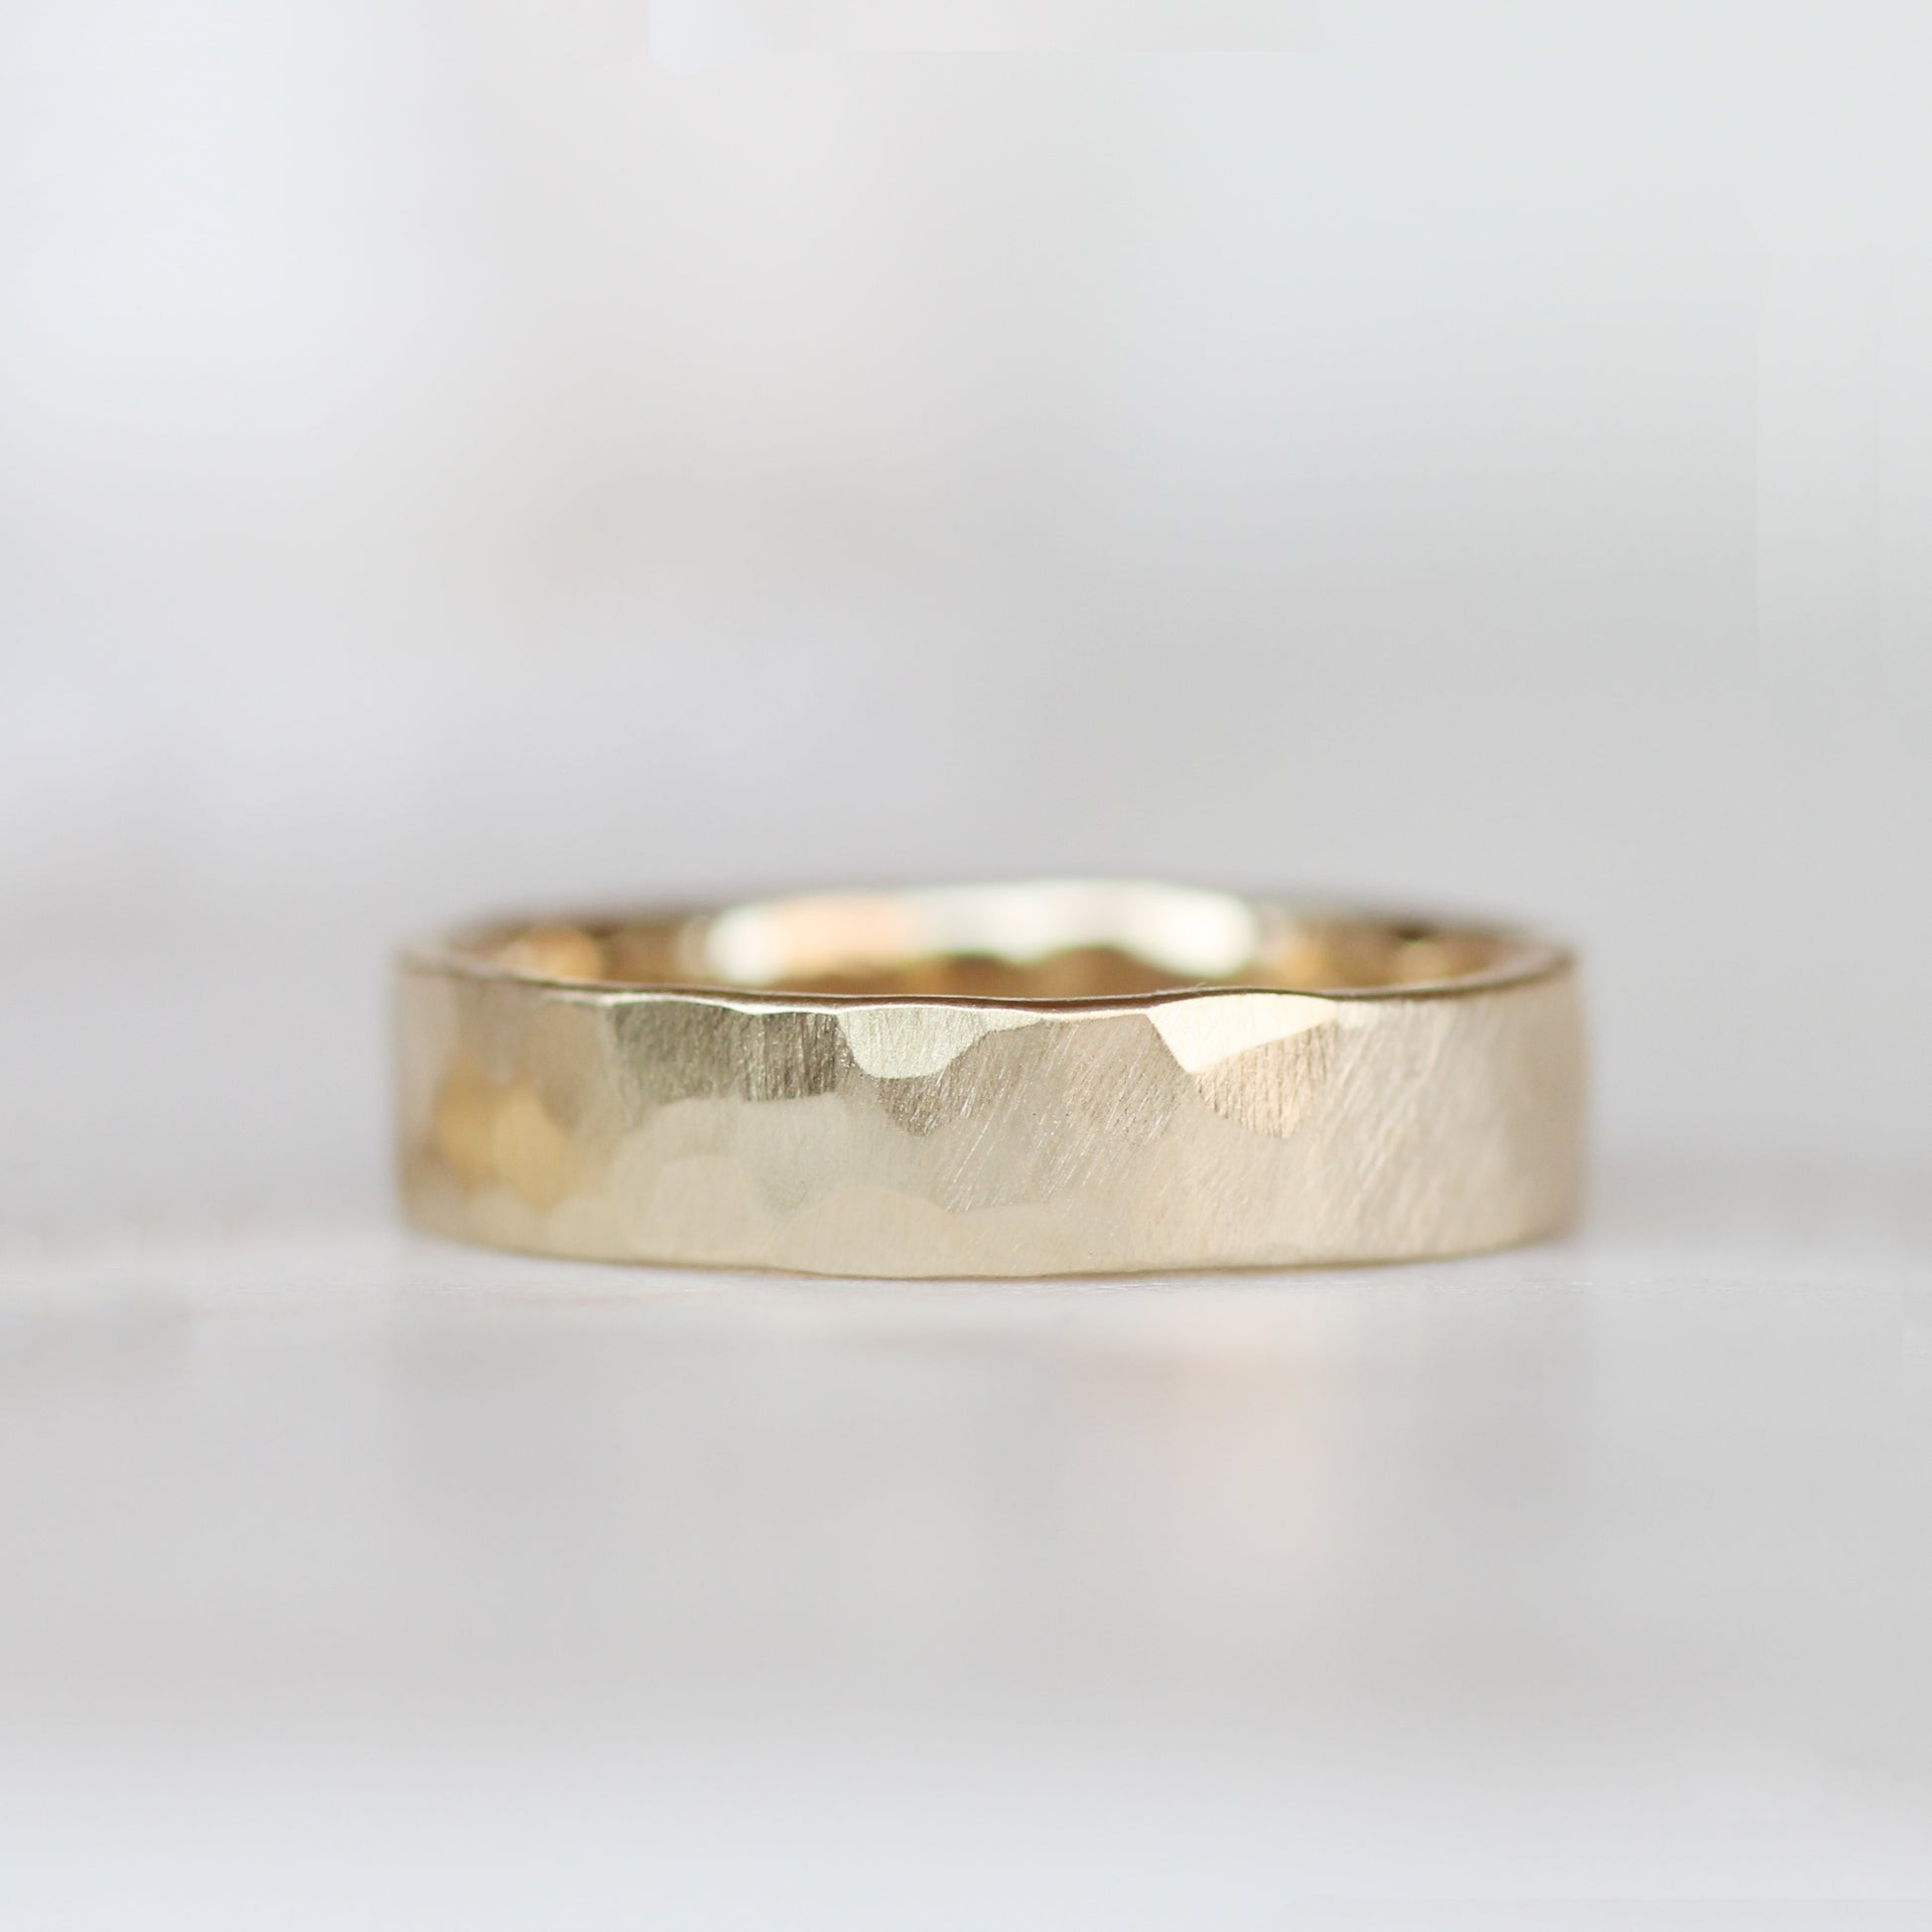 Hammered Wedding Band Ring - 2mm to 8mm Options - 14k Gold Wedding Band - Unisex - Many options - Midwinter Co. Alternative Bridal Rings and Modern Fine Jewelry